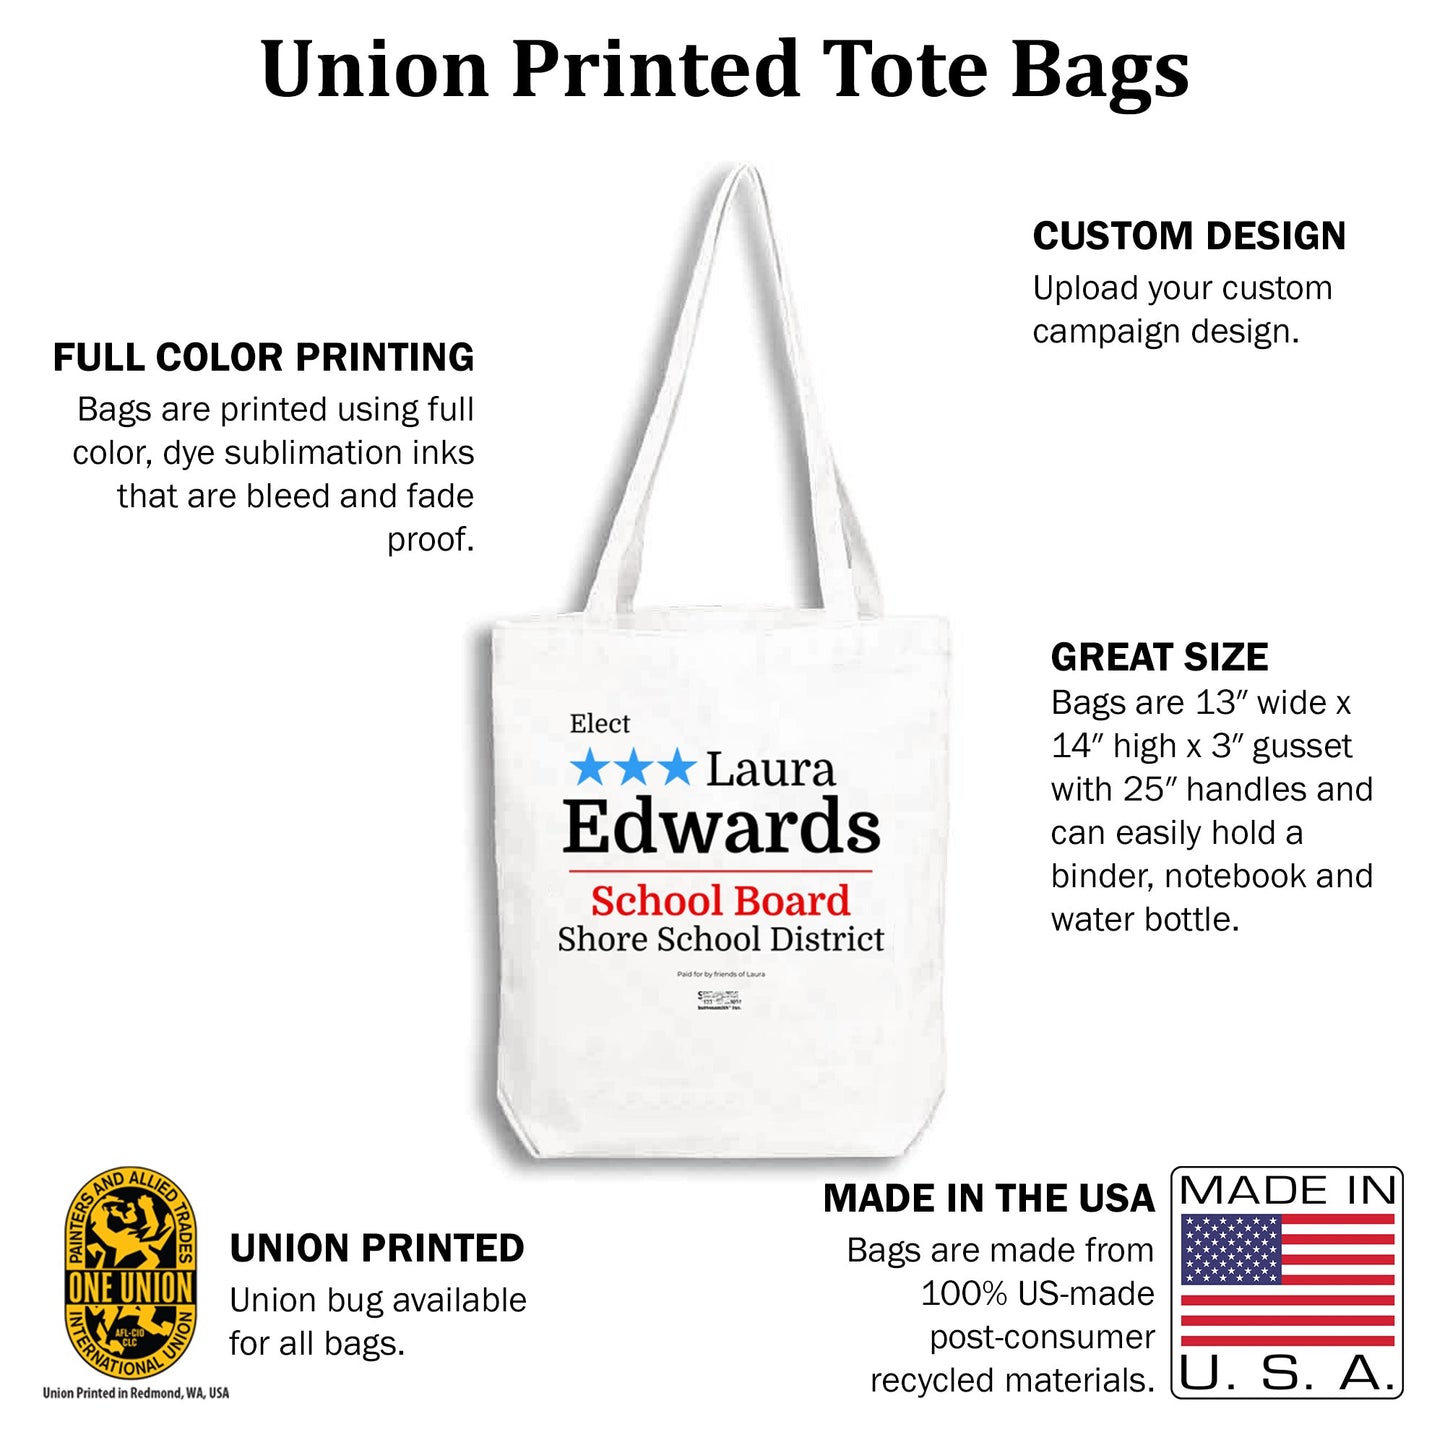 MerchBlue Union-Printed Tote bag - Custom design - Made in the USA from recycled fabric